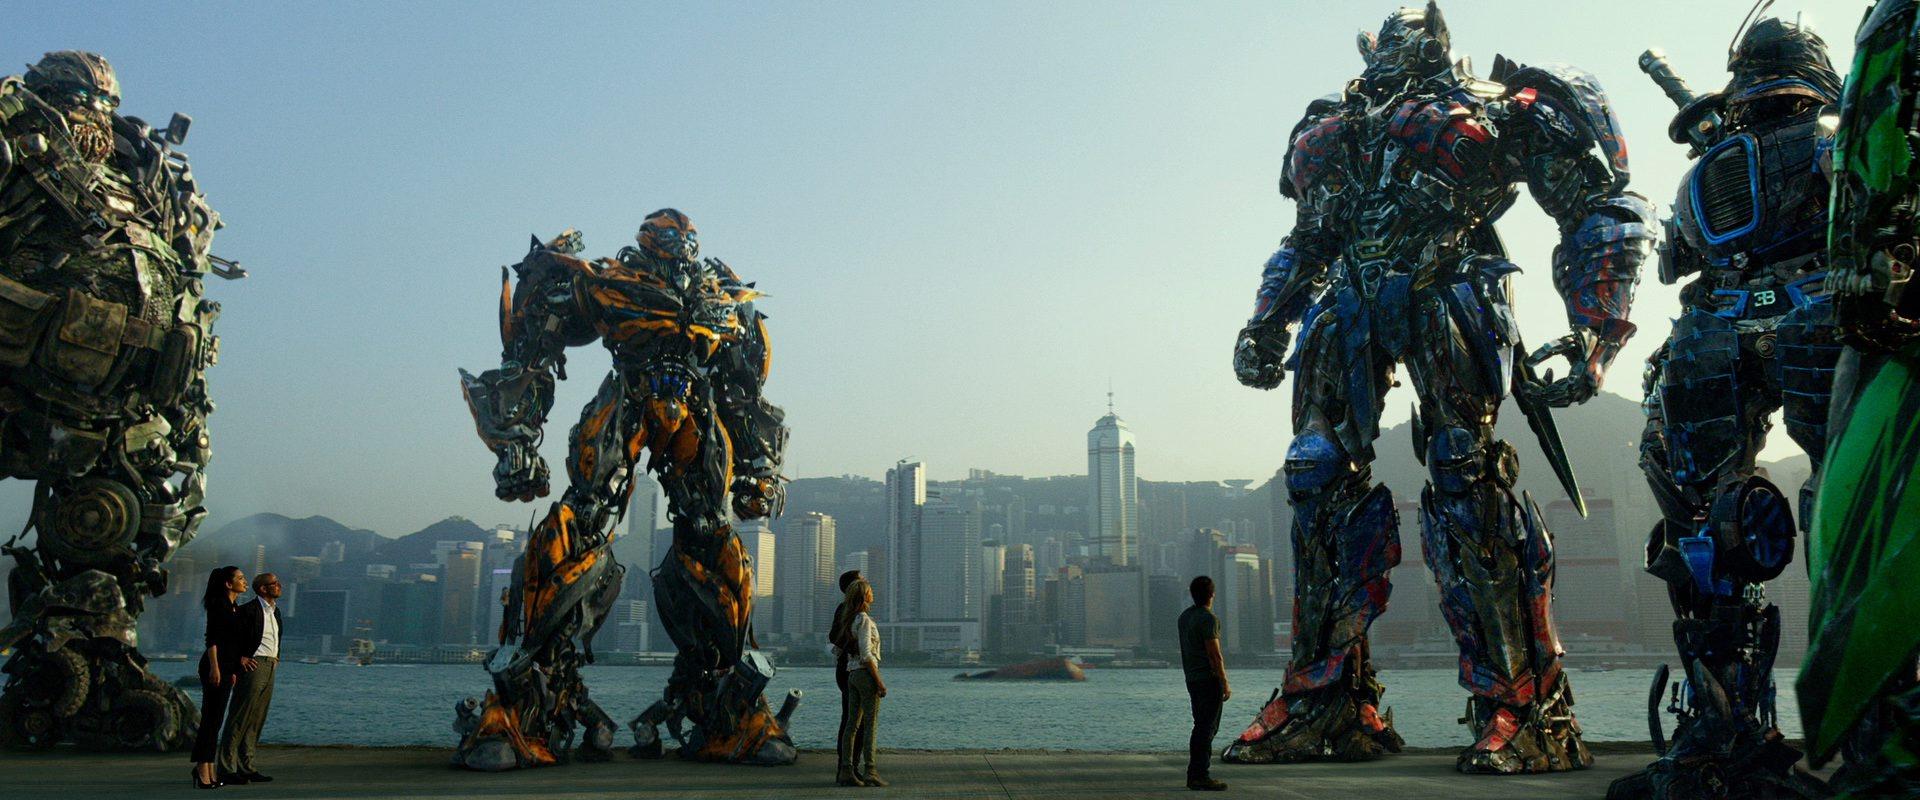 How Transformers Wants to be More Like the Marvel Universe